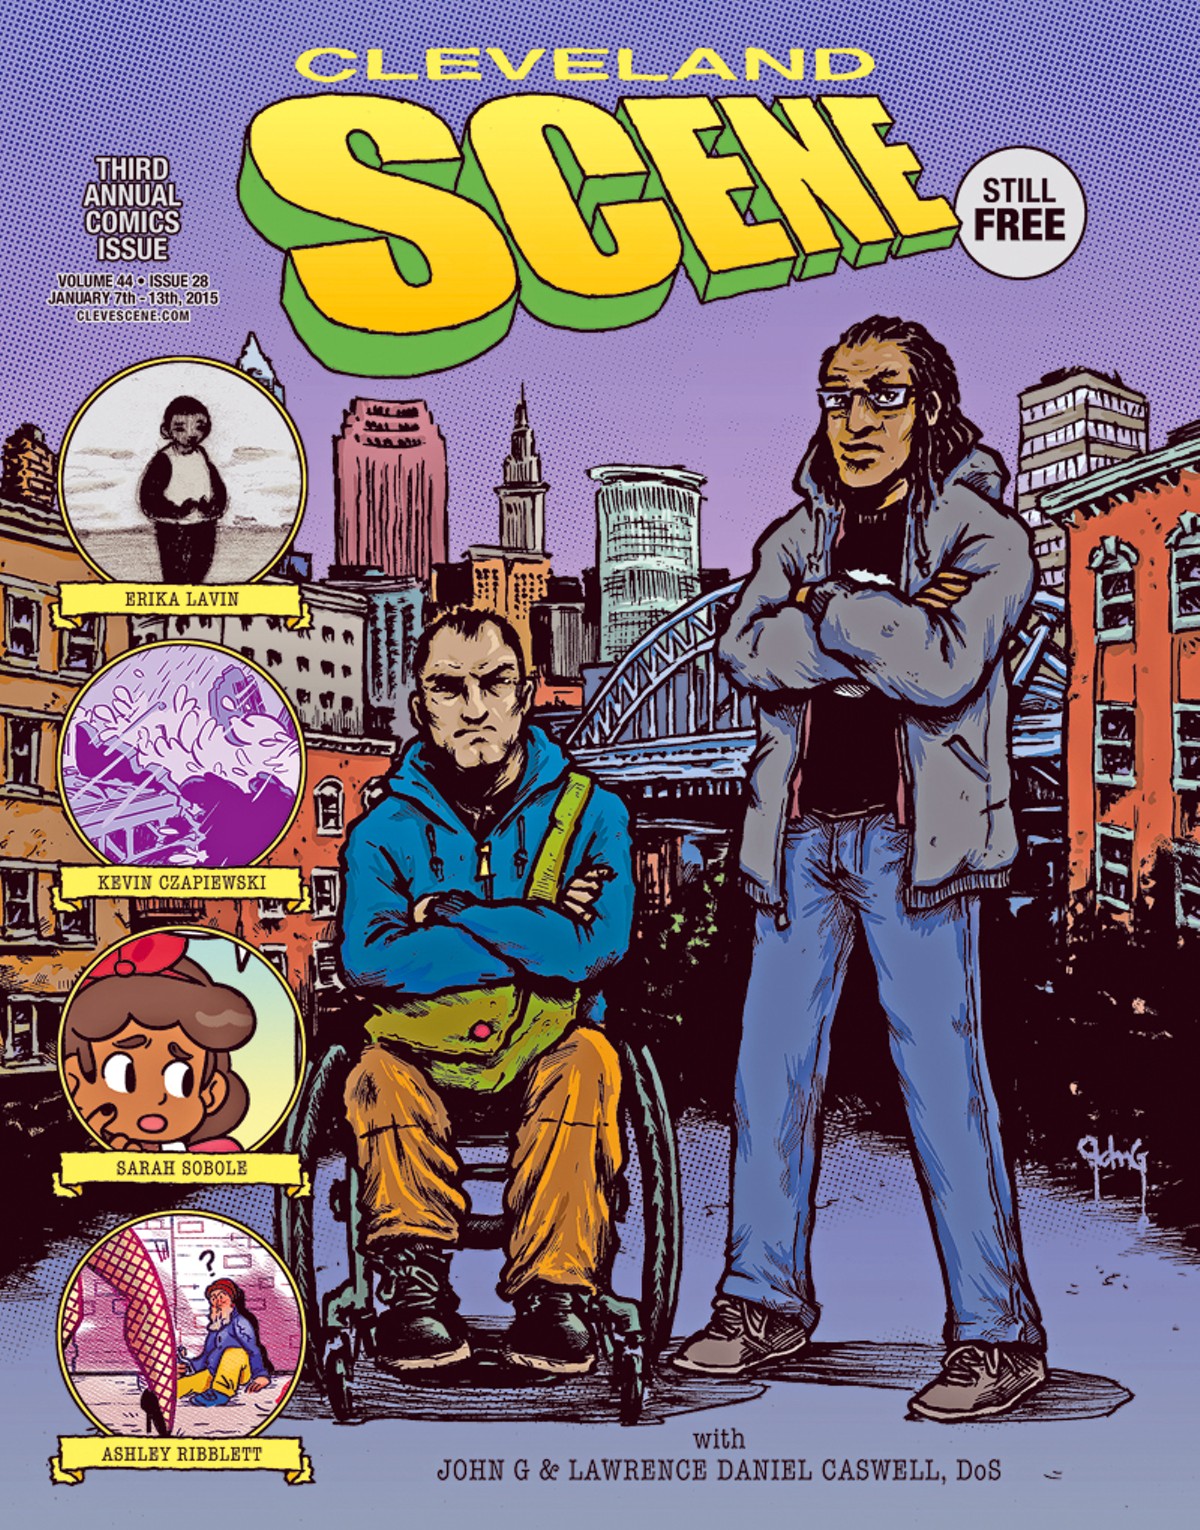 The 3rd Annual Cleveland Comics Issue